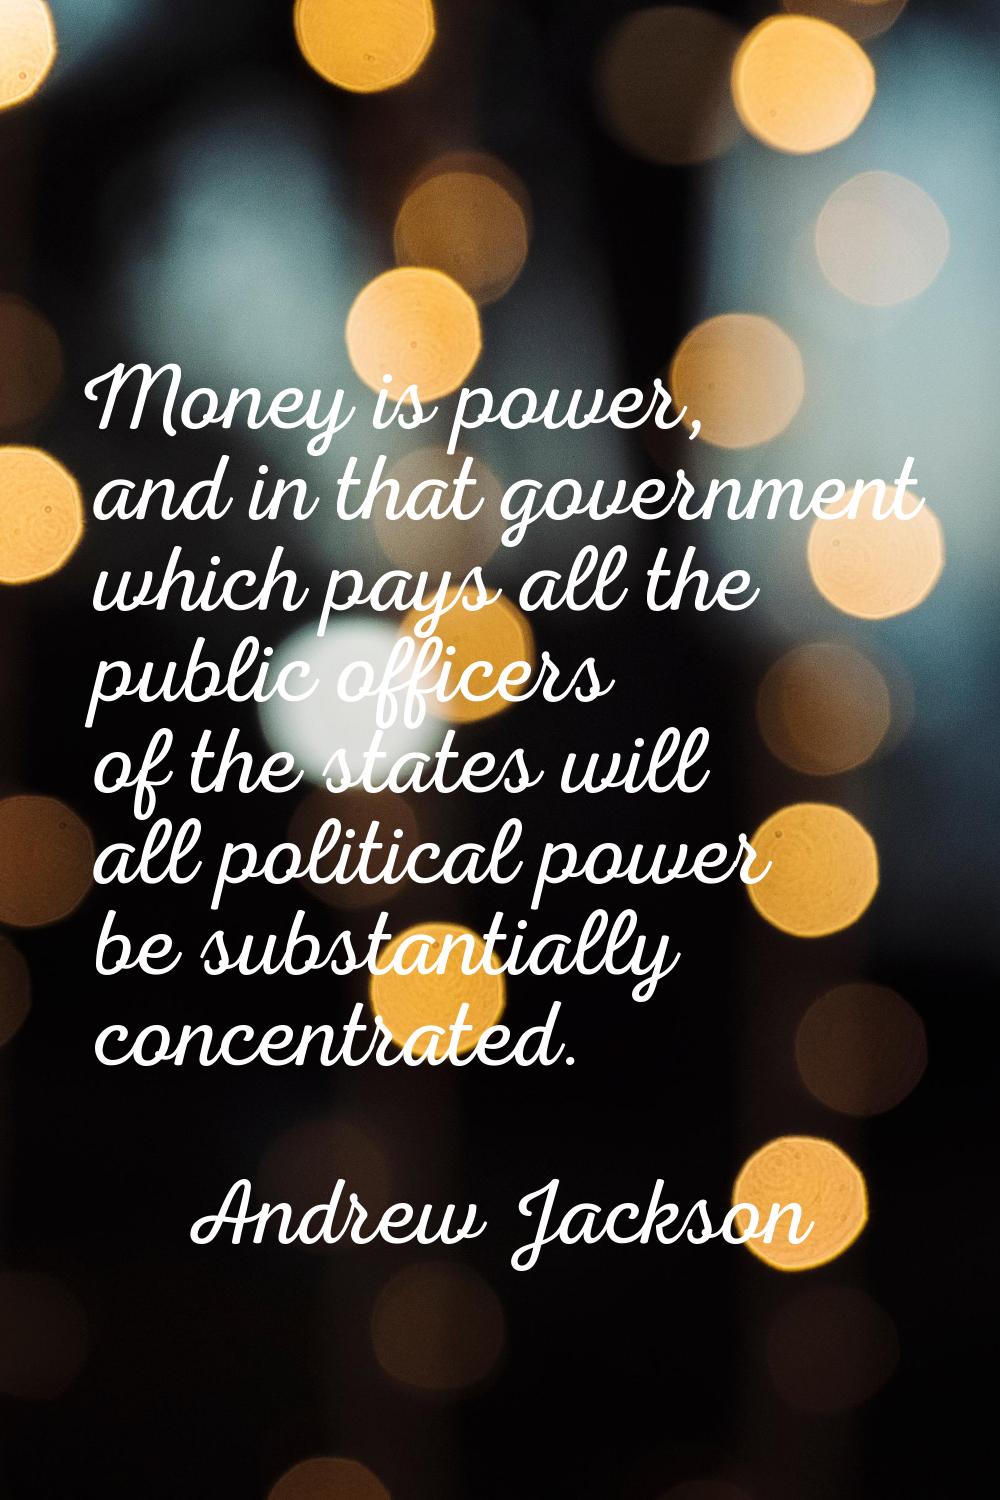 Money is power, and in that government which pays all the public officers of the states will all po